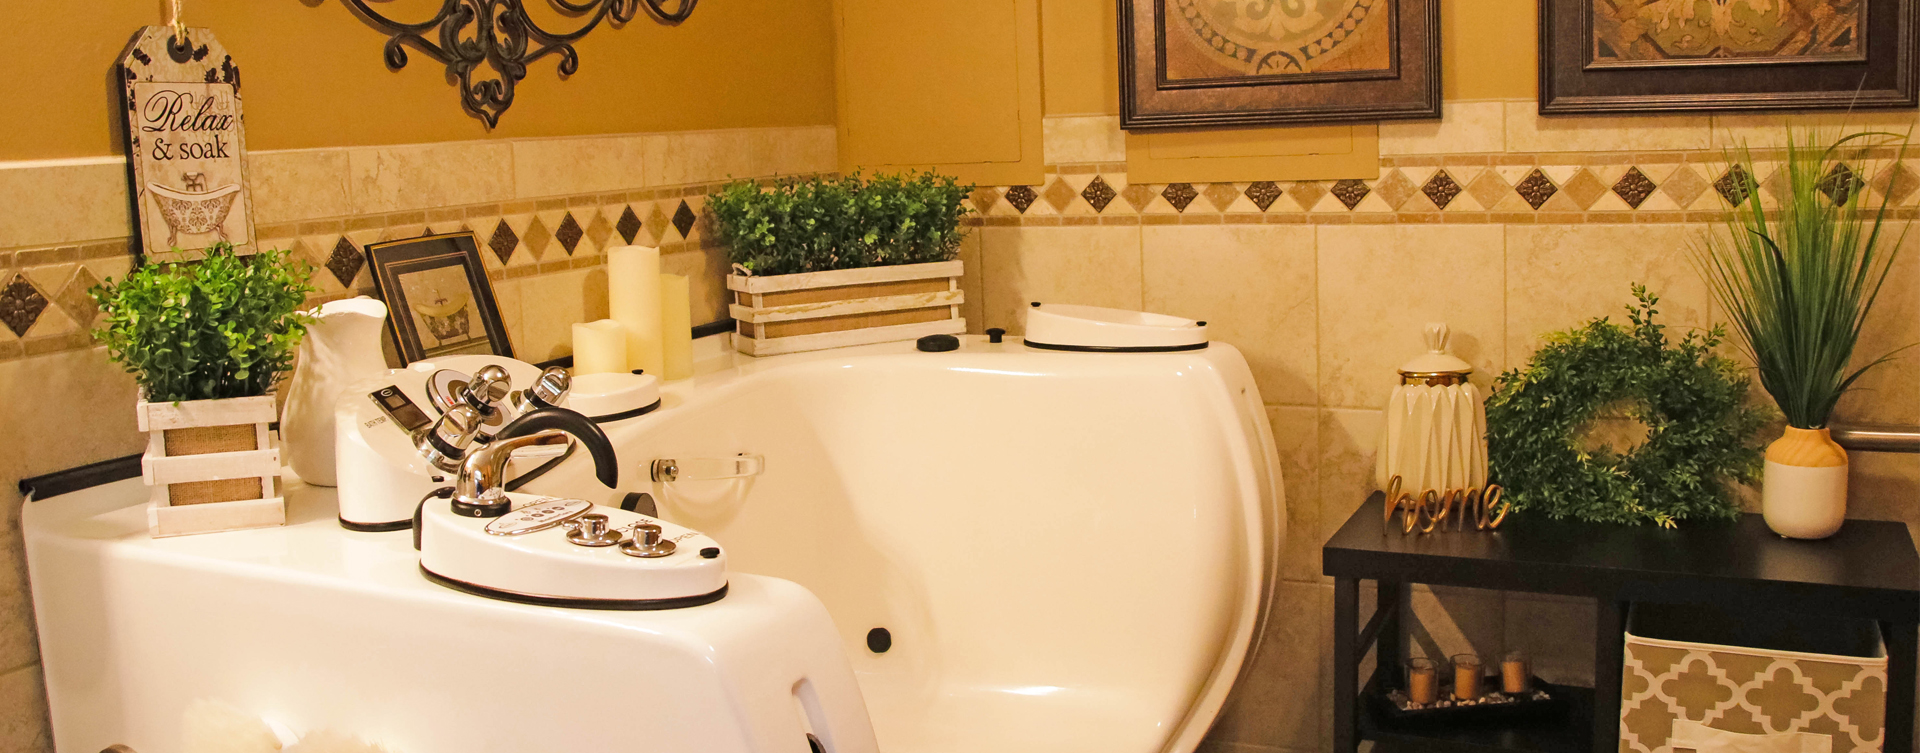 With an easy access design, our whirlpool allows you to enjoy a warm bath safely and comfortably at Bickford of Ames